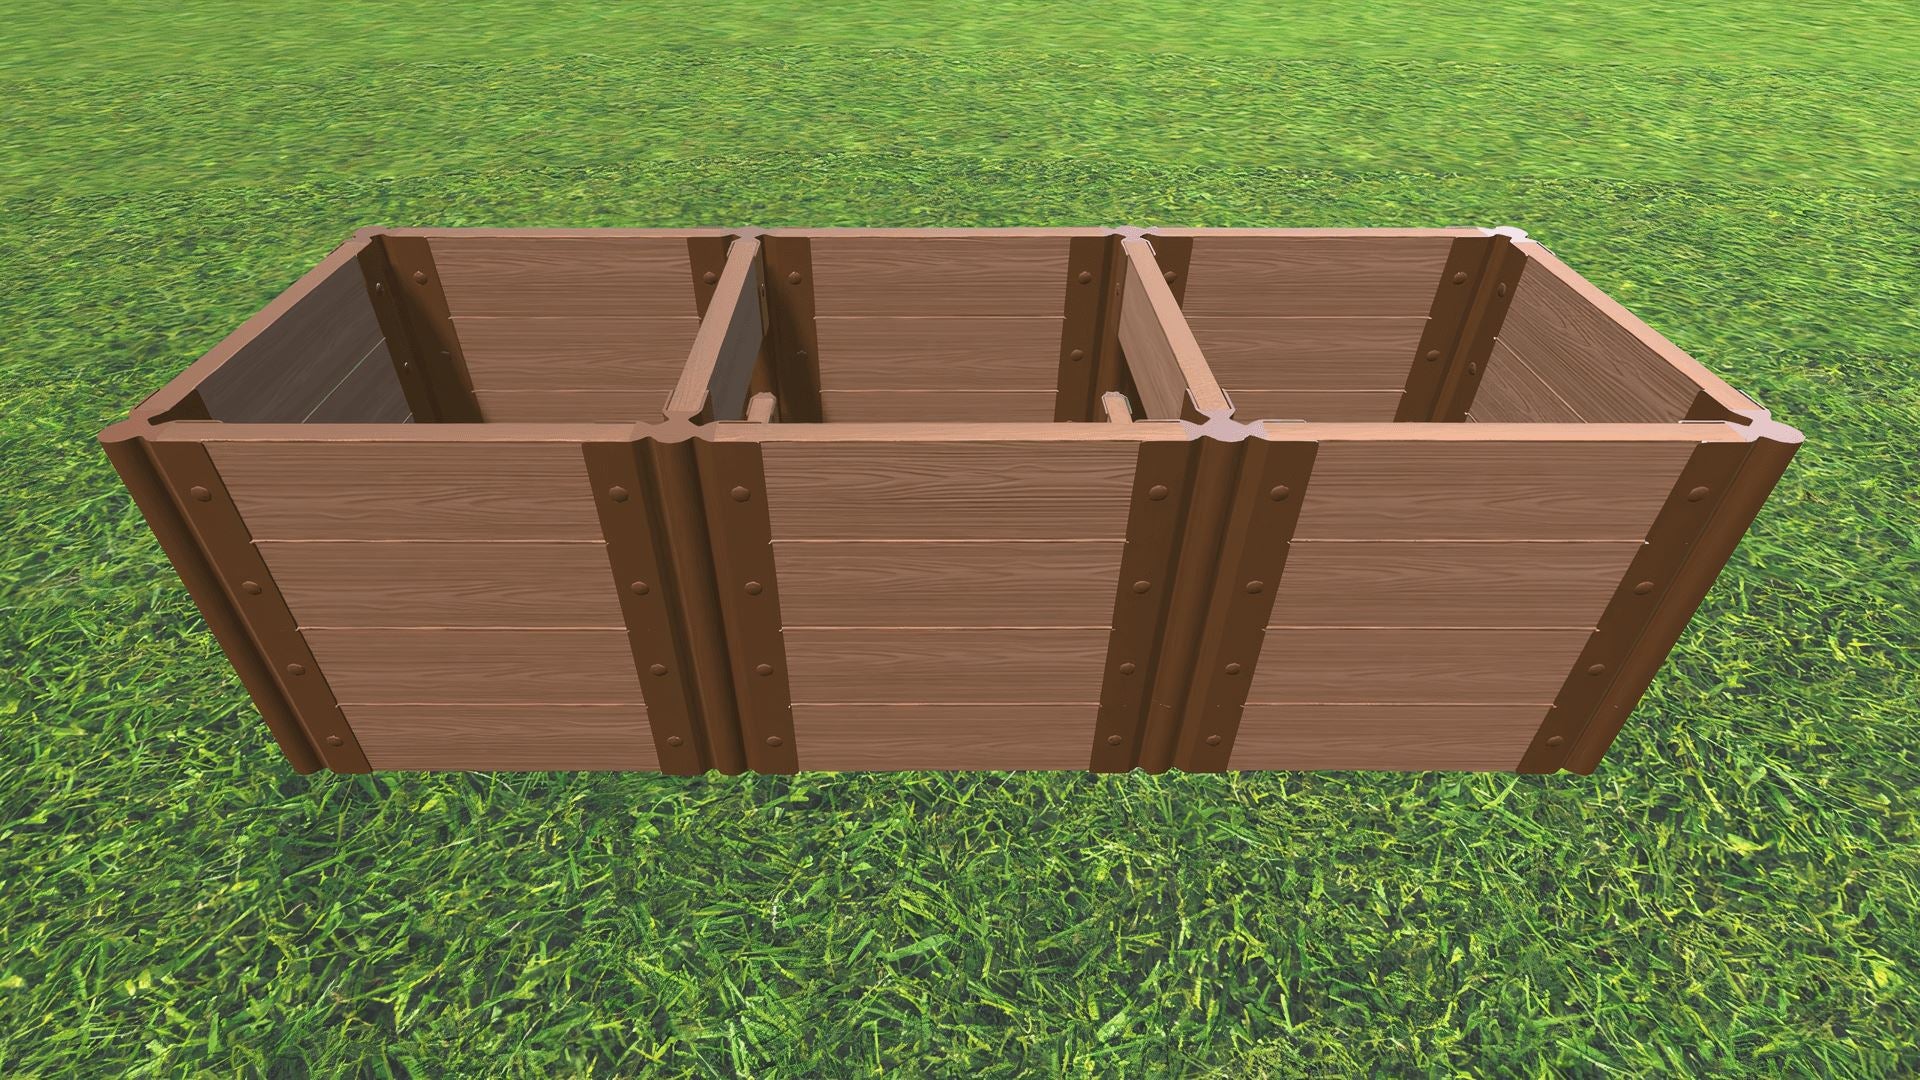 Tool-Free 2' x 6' Raised Garden Bed Raised Bed Planters Frame It All Classic Sienna 2" 4 = 22"